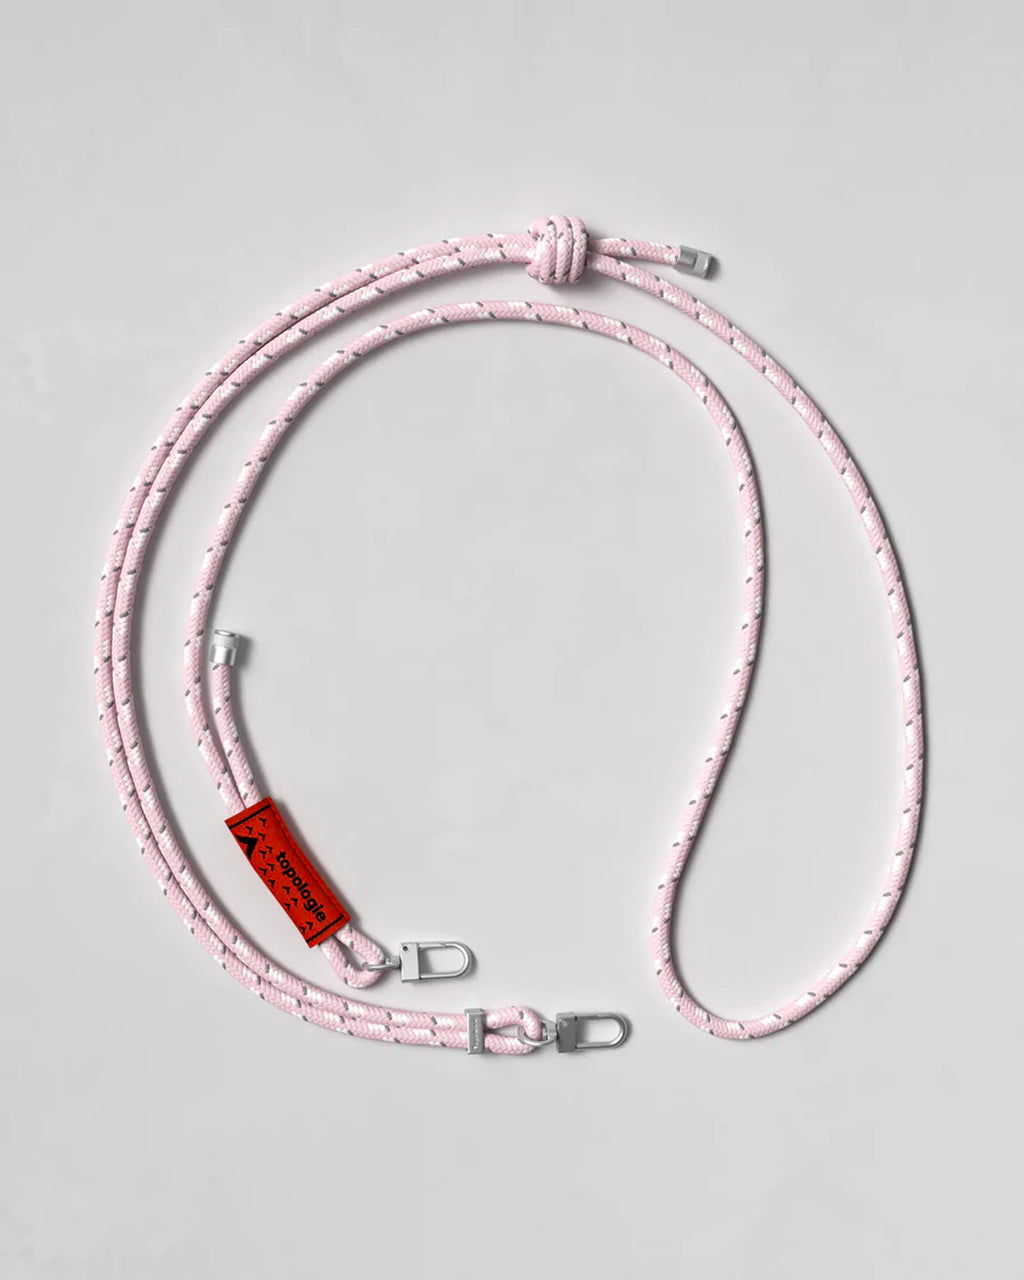 Topologie Wares Strap 6.0mm Rope Strap - Blush Reflective